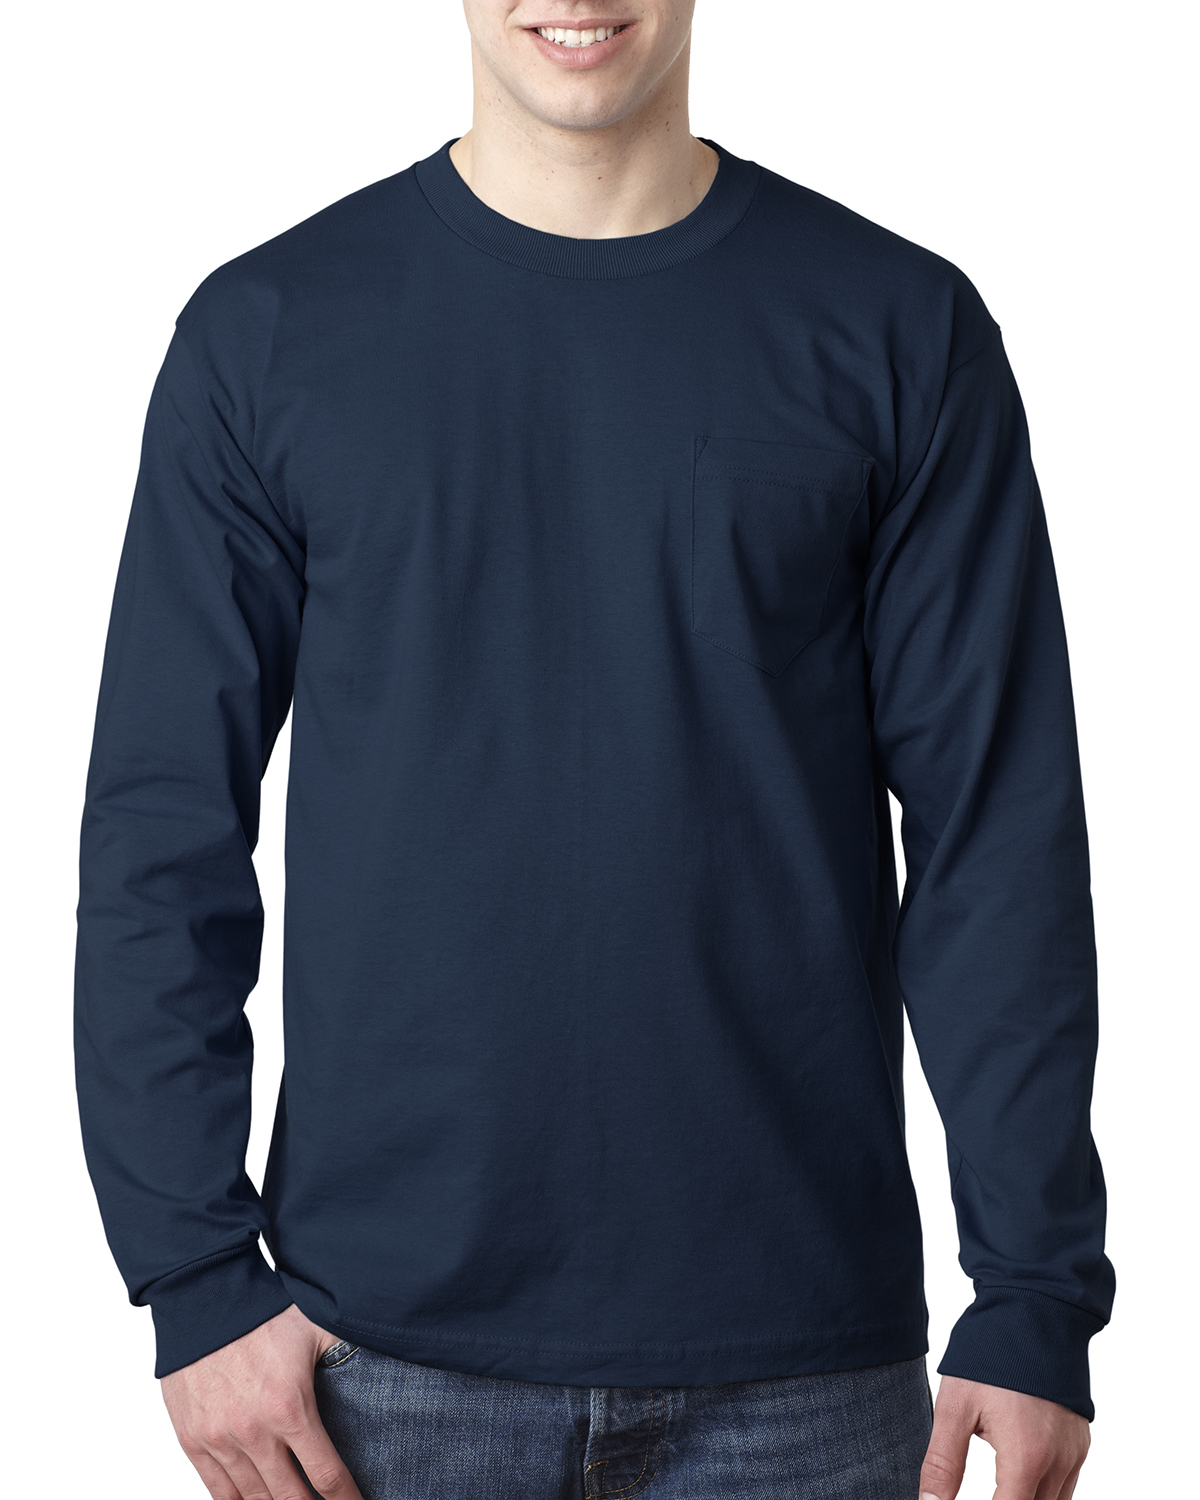 Bayside 8100 Long Sleeve T-Shirt with a Pocket